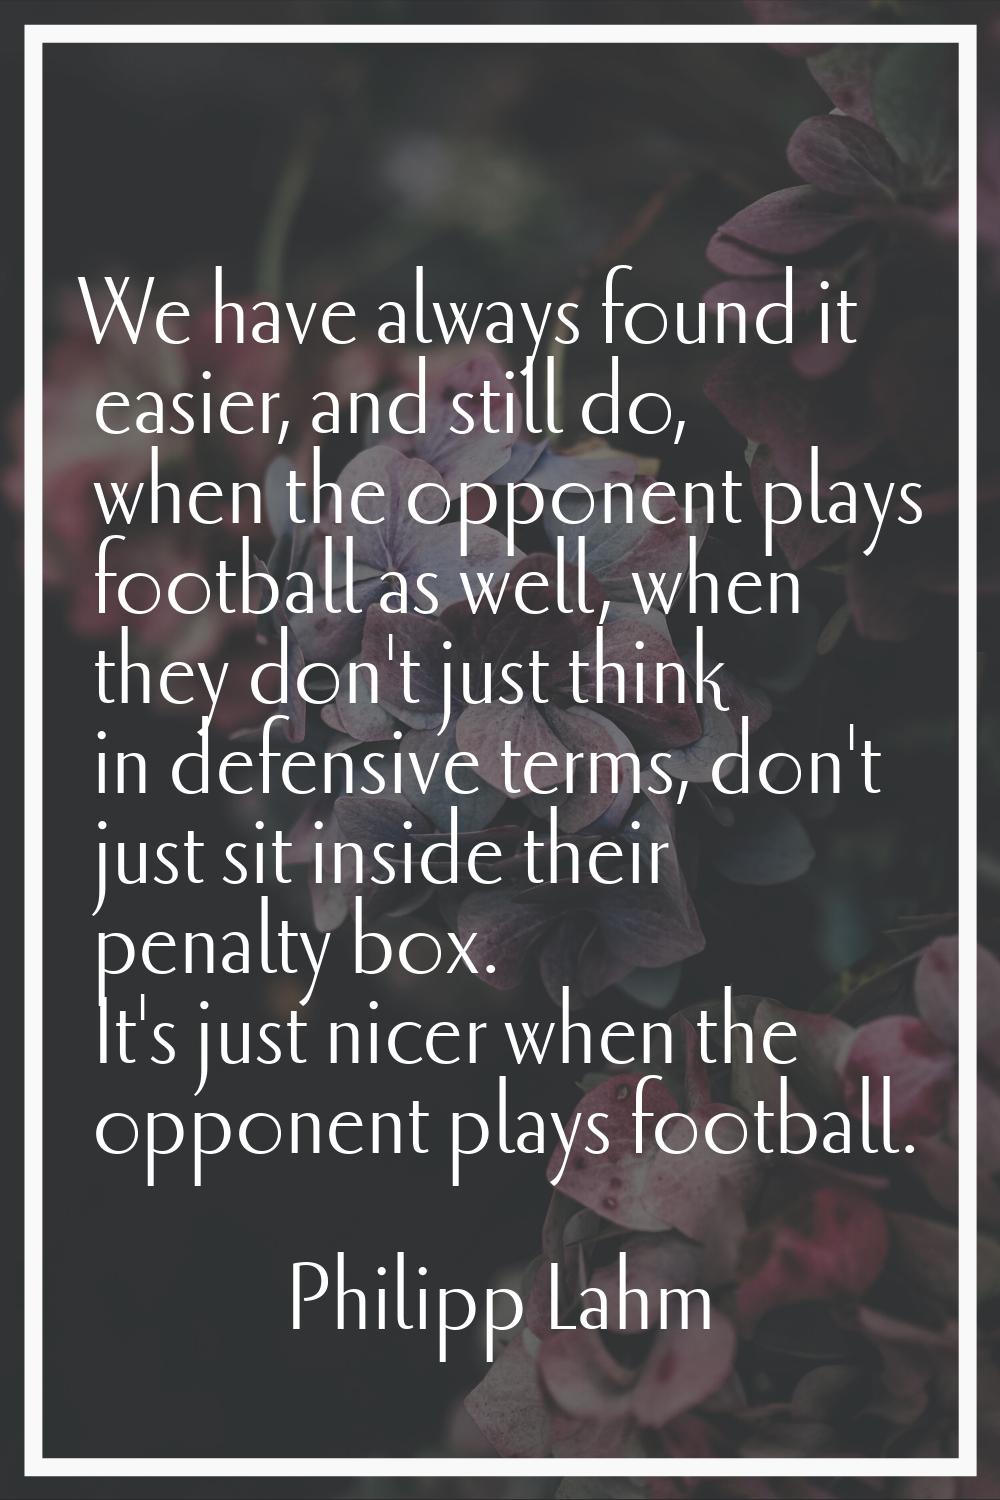 We have always found it easier, and still do, when the opponent plays football as well, when they d